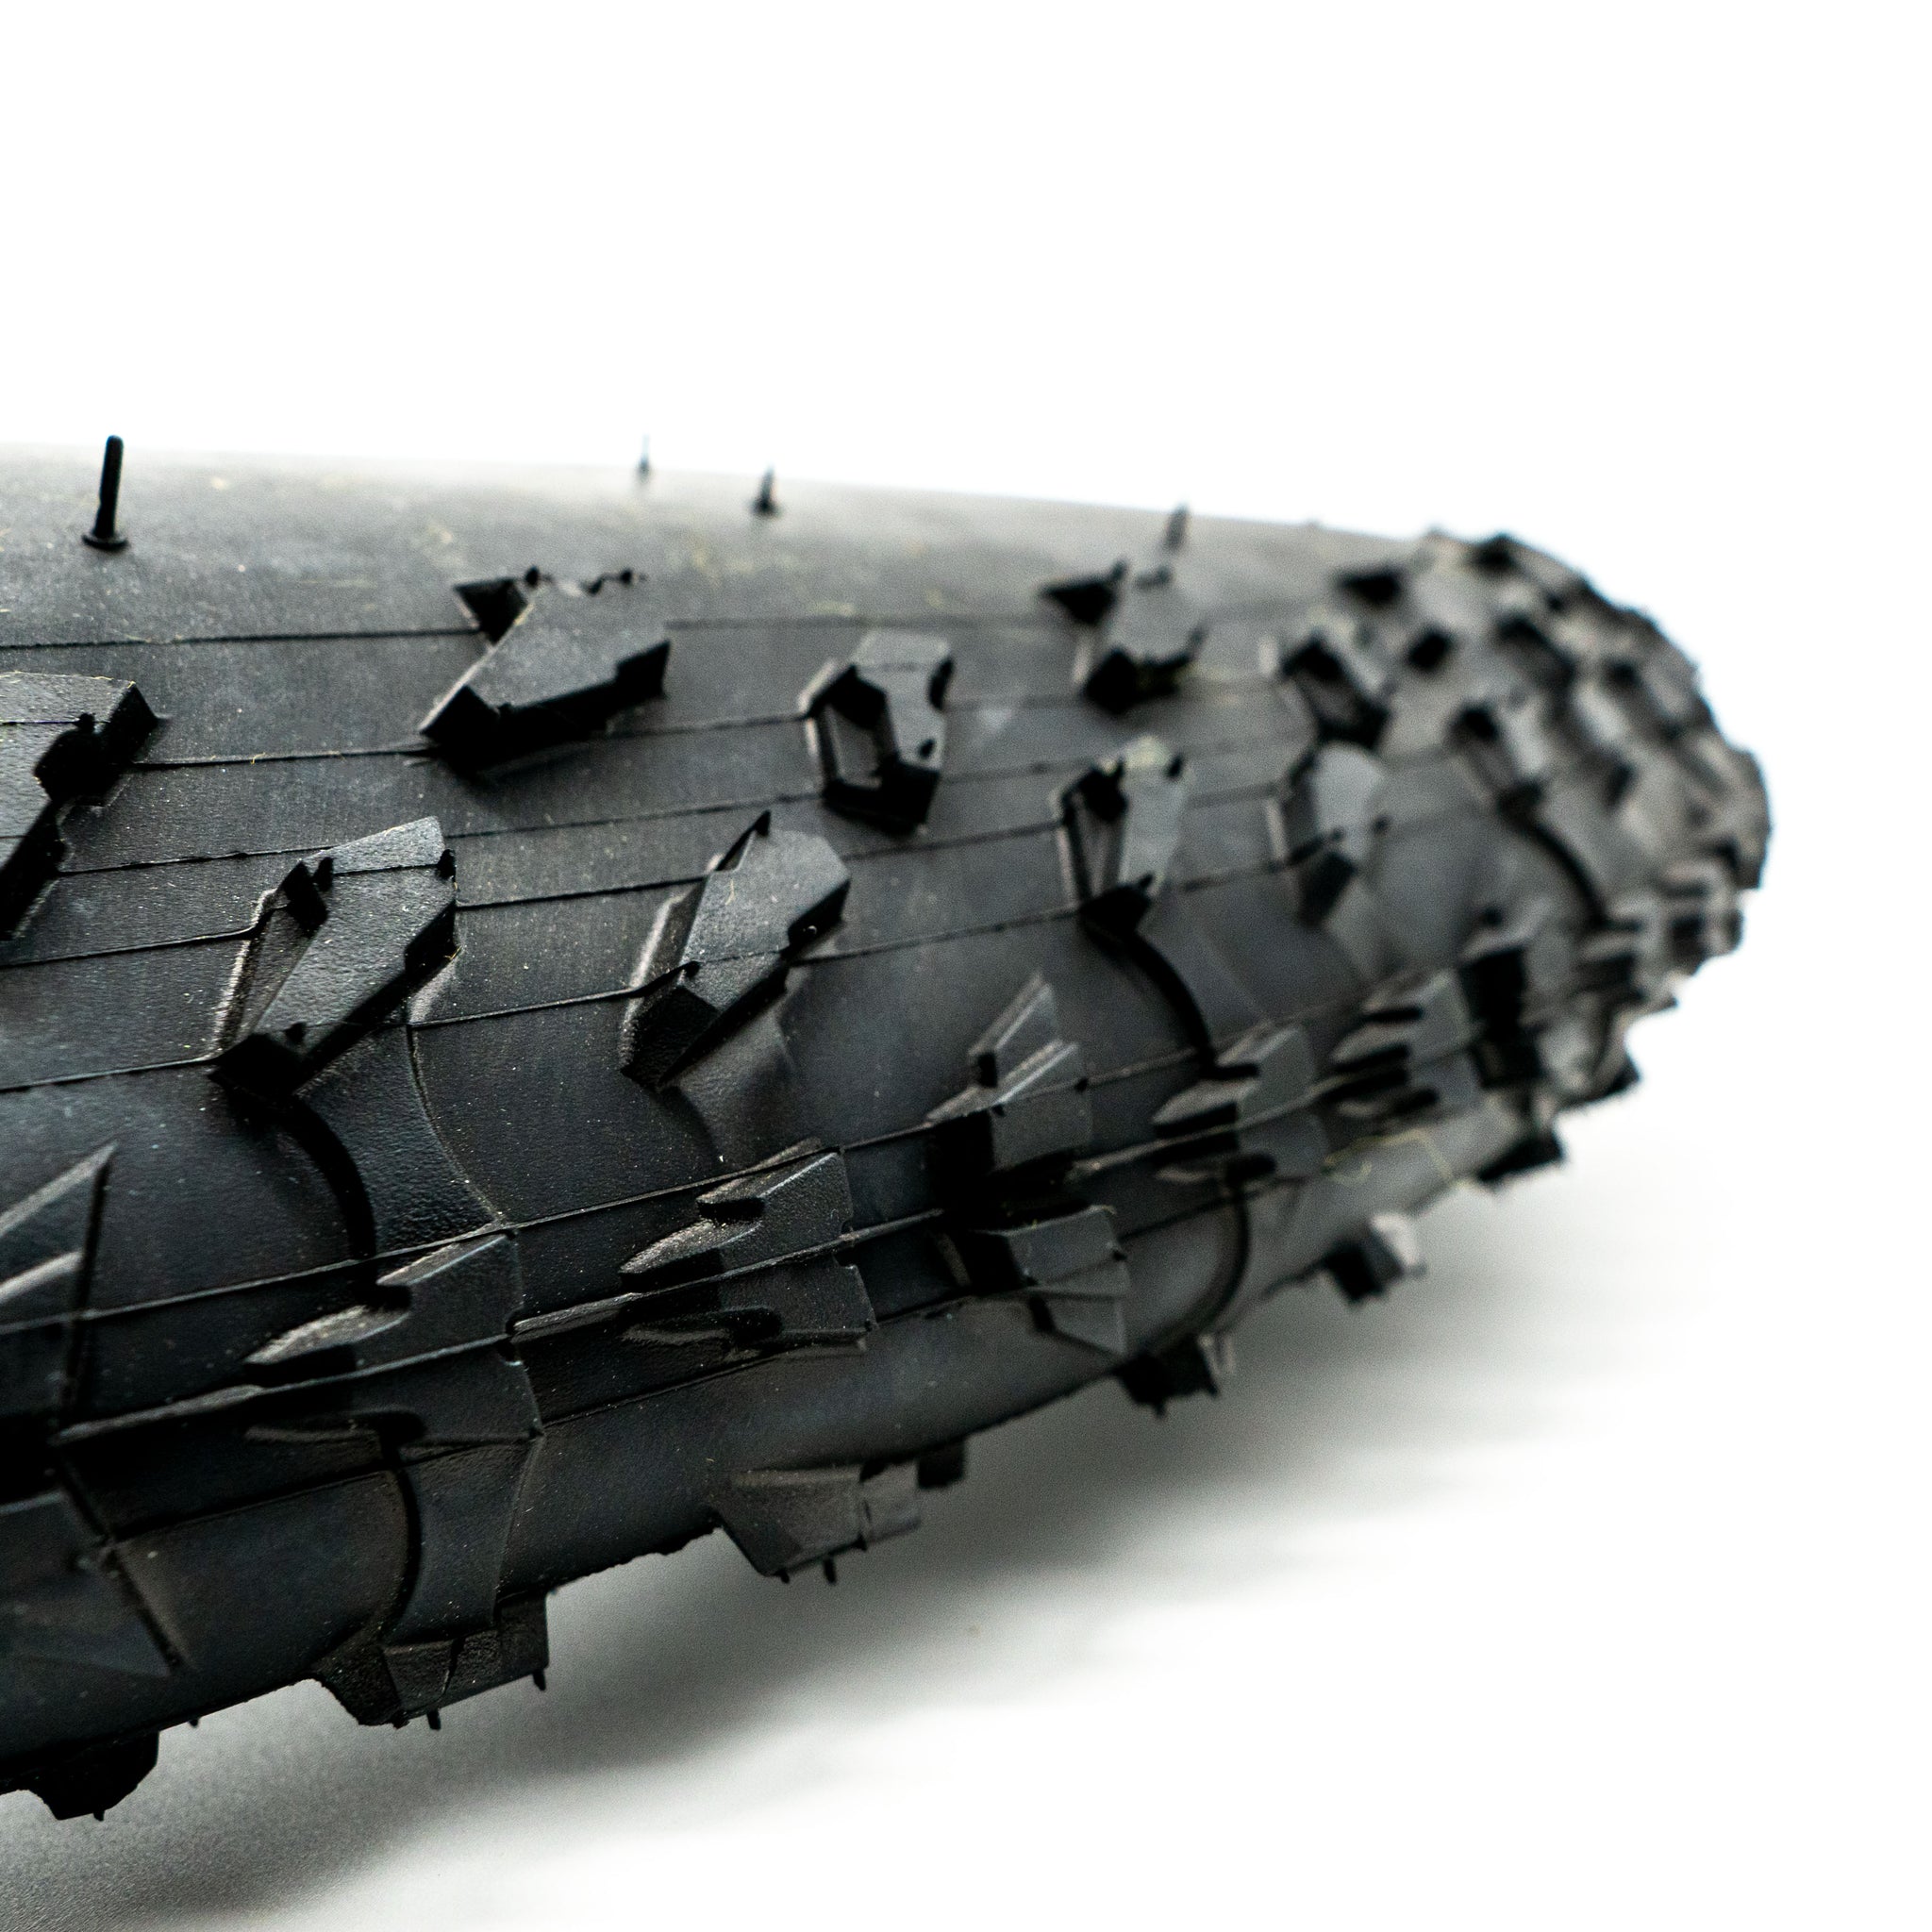 20 x 4 bicycle tire